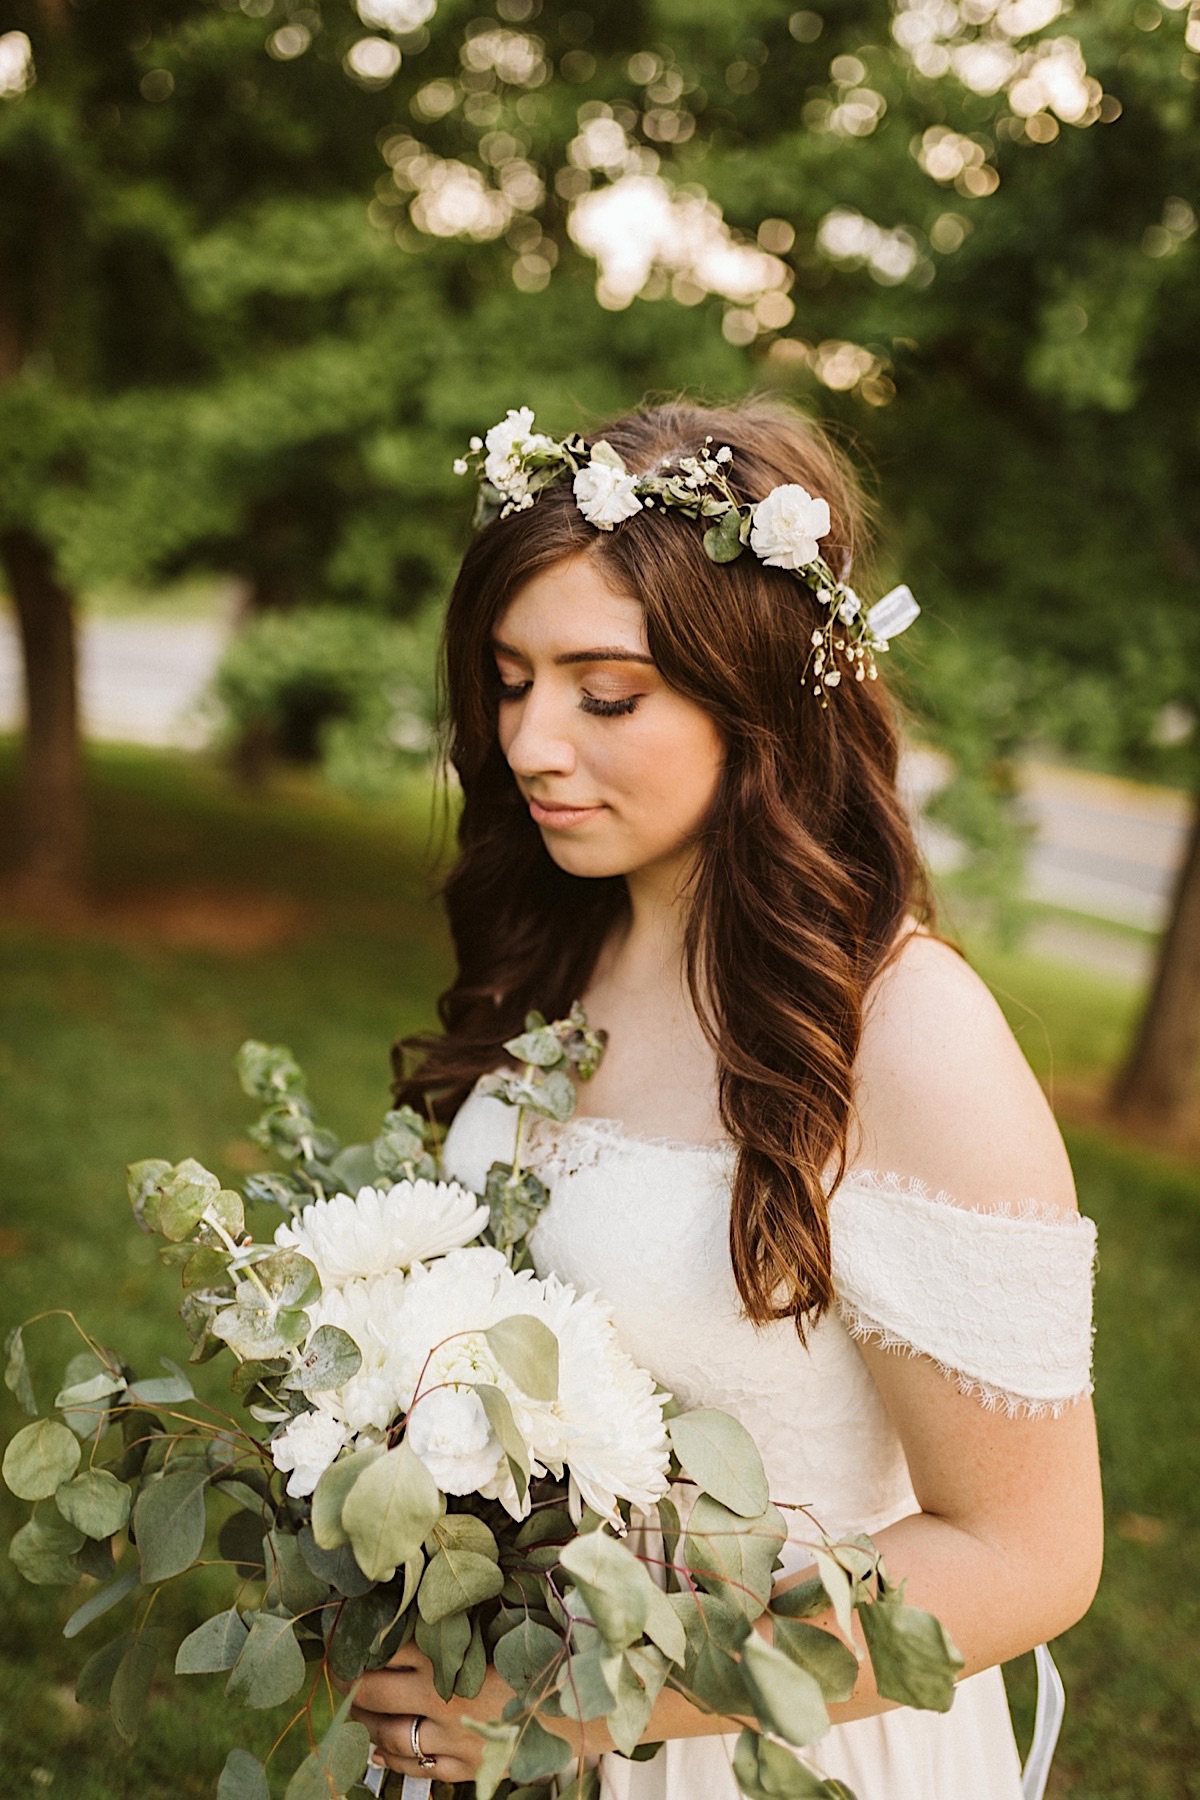 Bride wears a white flower crown in her dark hair. She looks down at her white floral bouquet with eucalyptus greens.